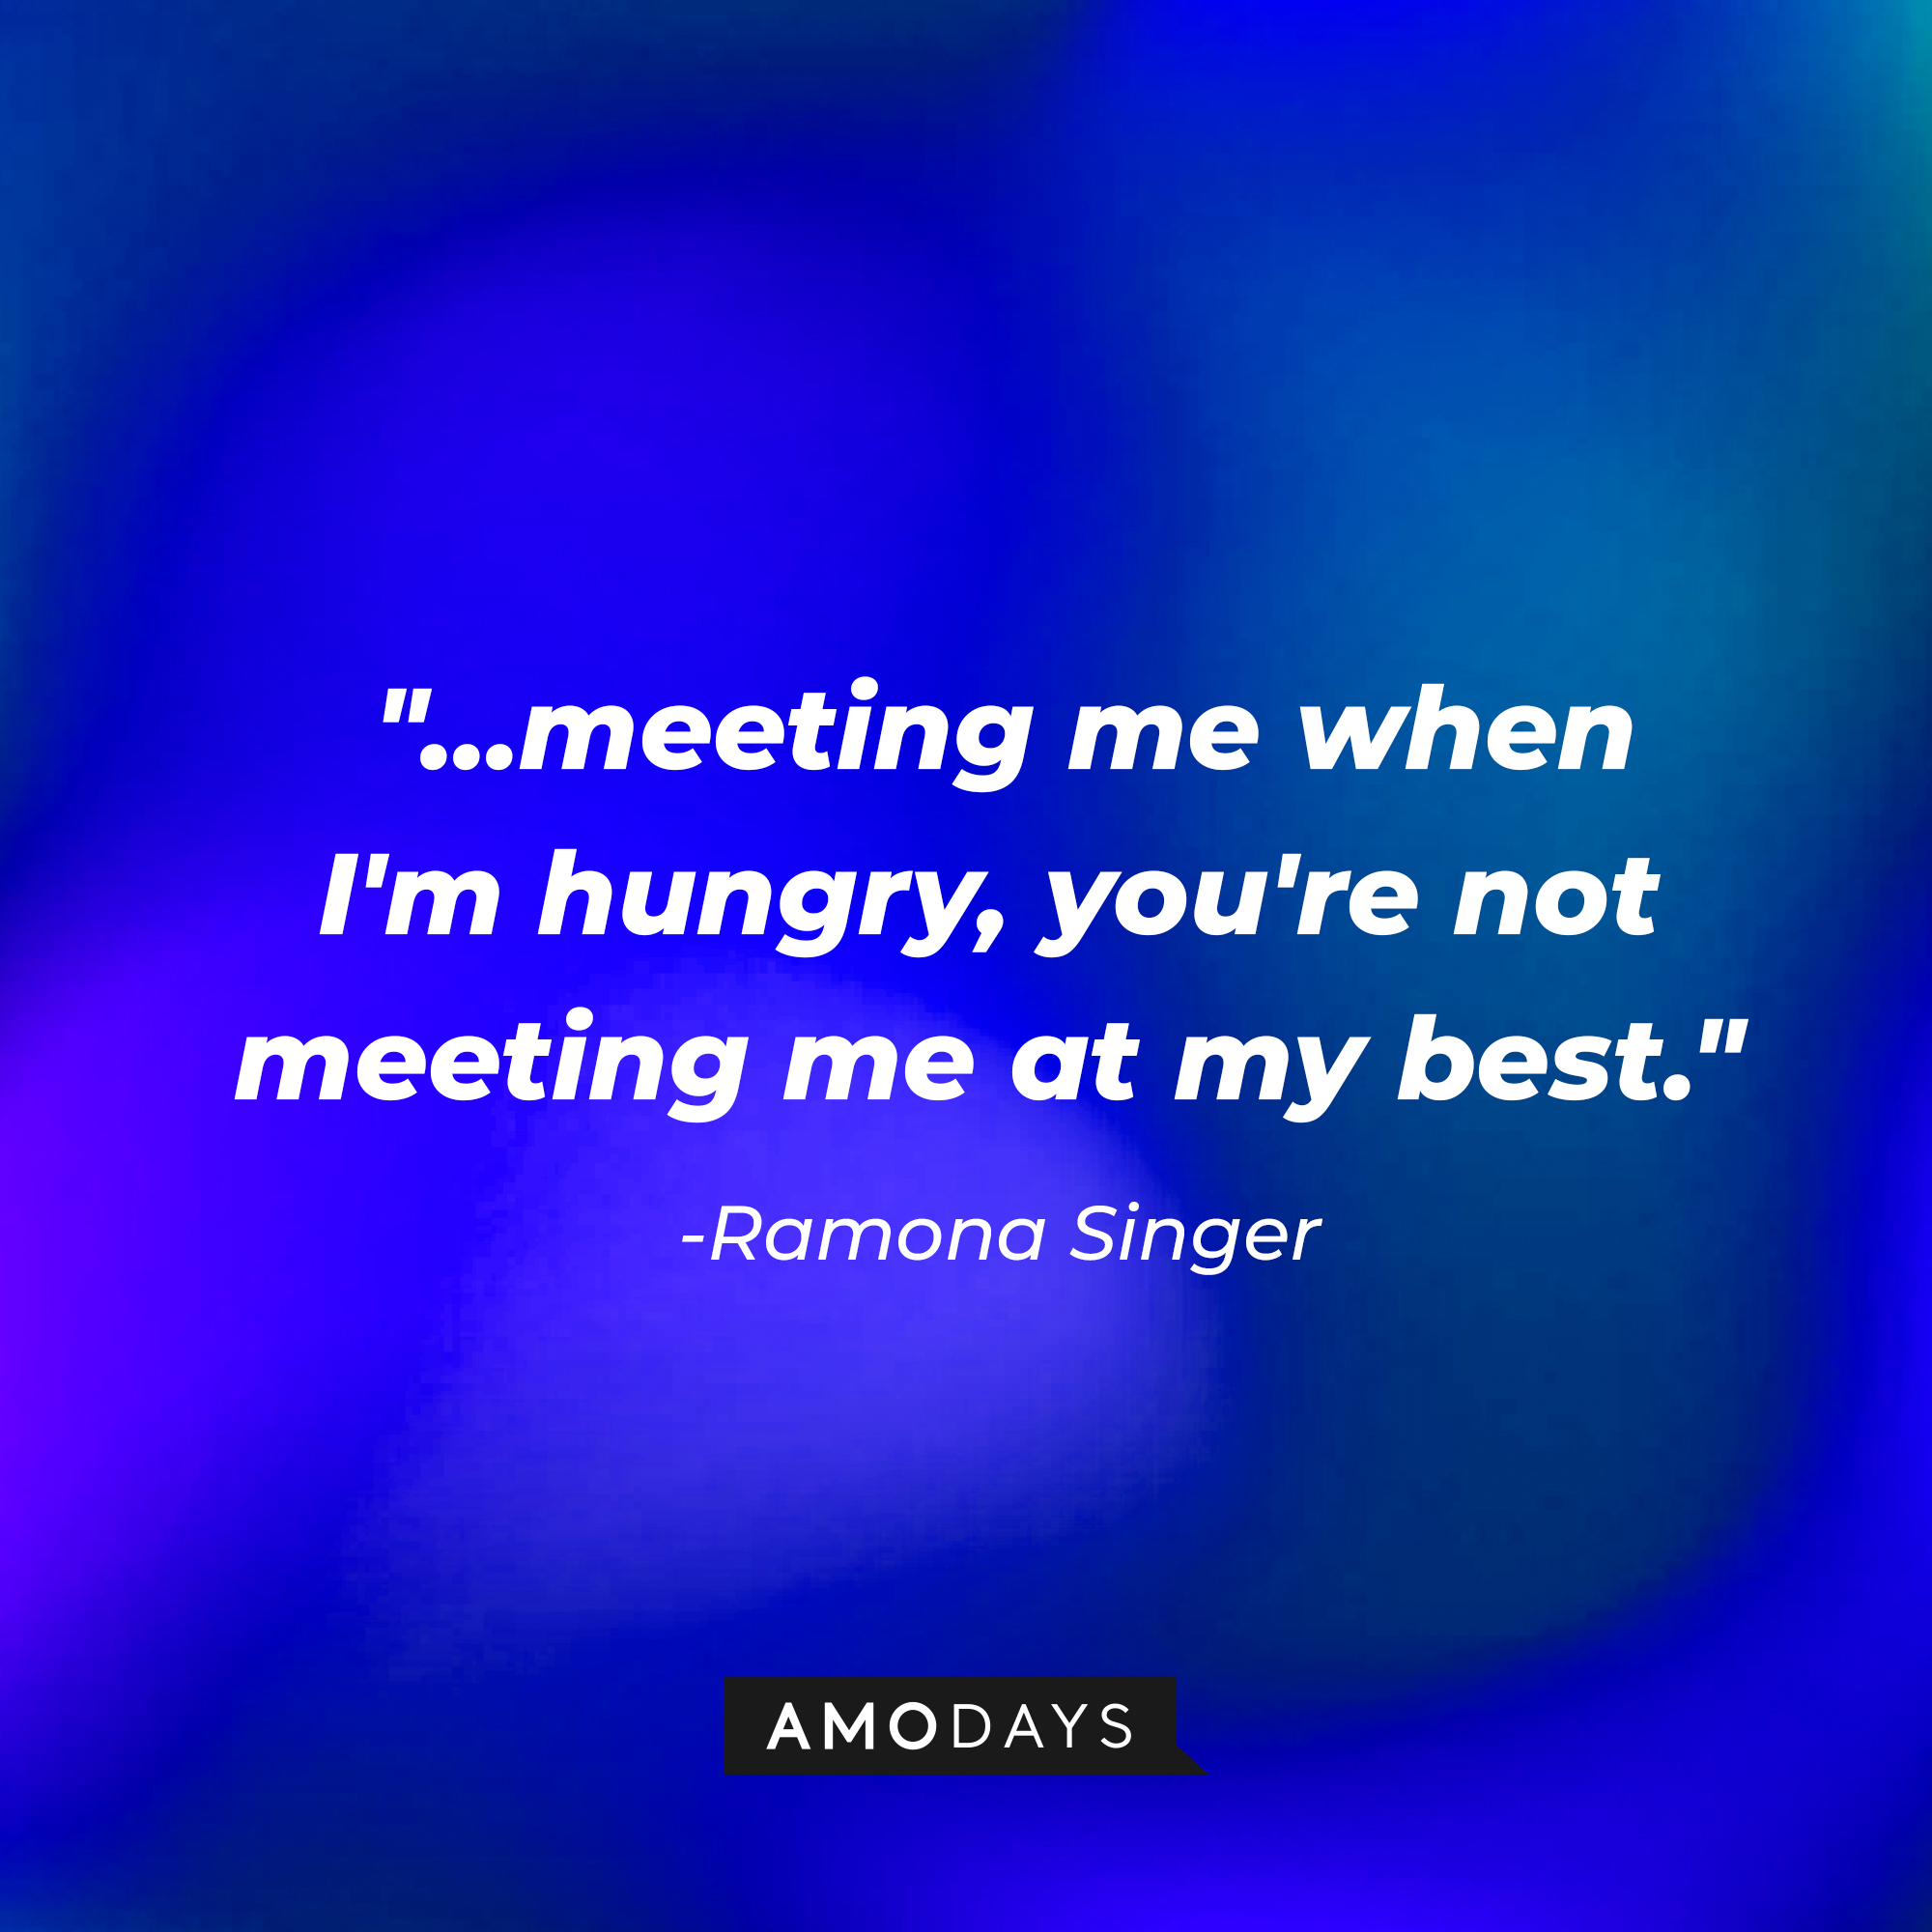 Ramona Singer’s quote: “…meeting me when I'm hungry, you're not meeting me at my best.”  | Source: AmoDays